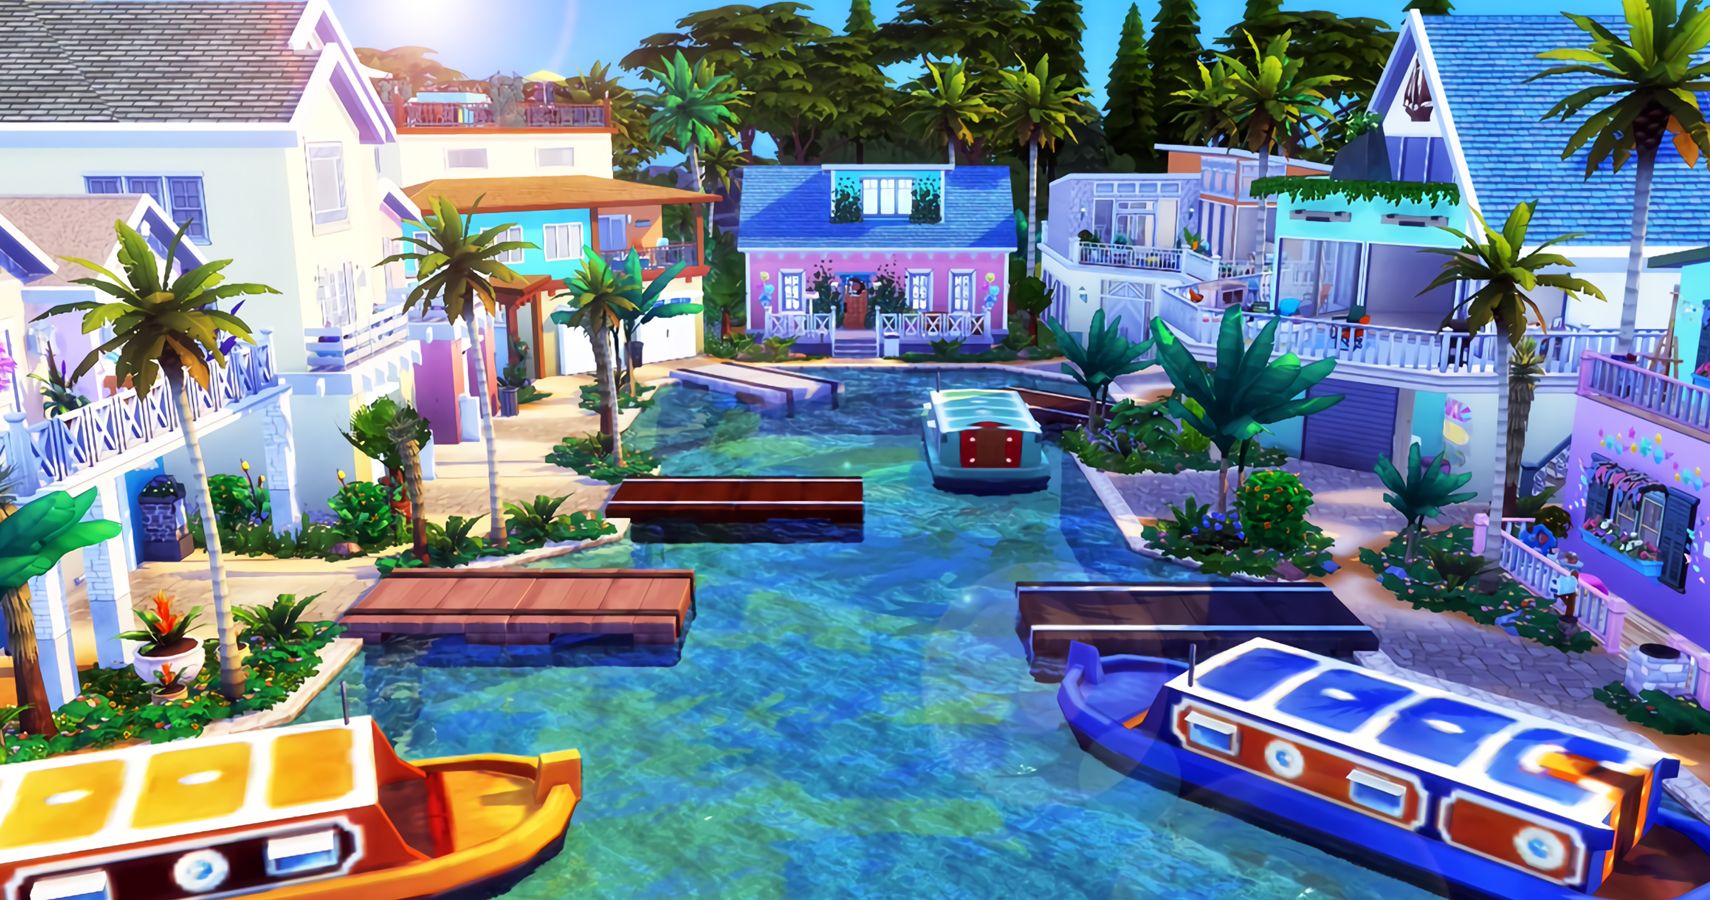 The Sims 4 Island Living Expansion Cheats